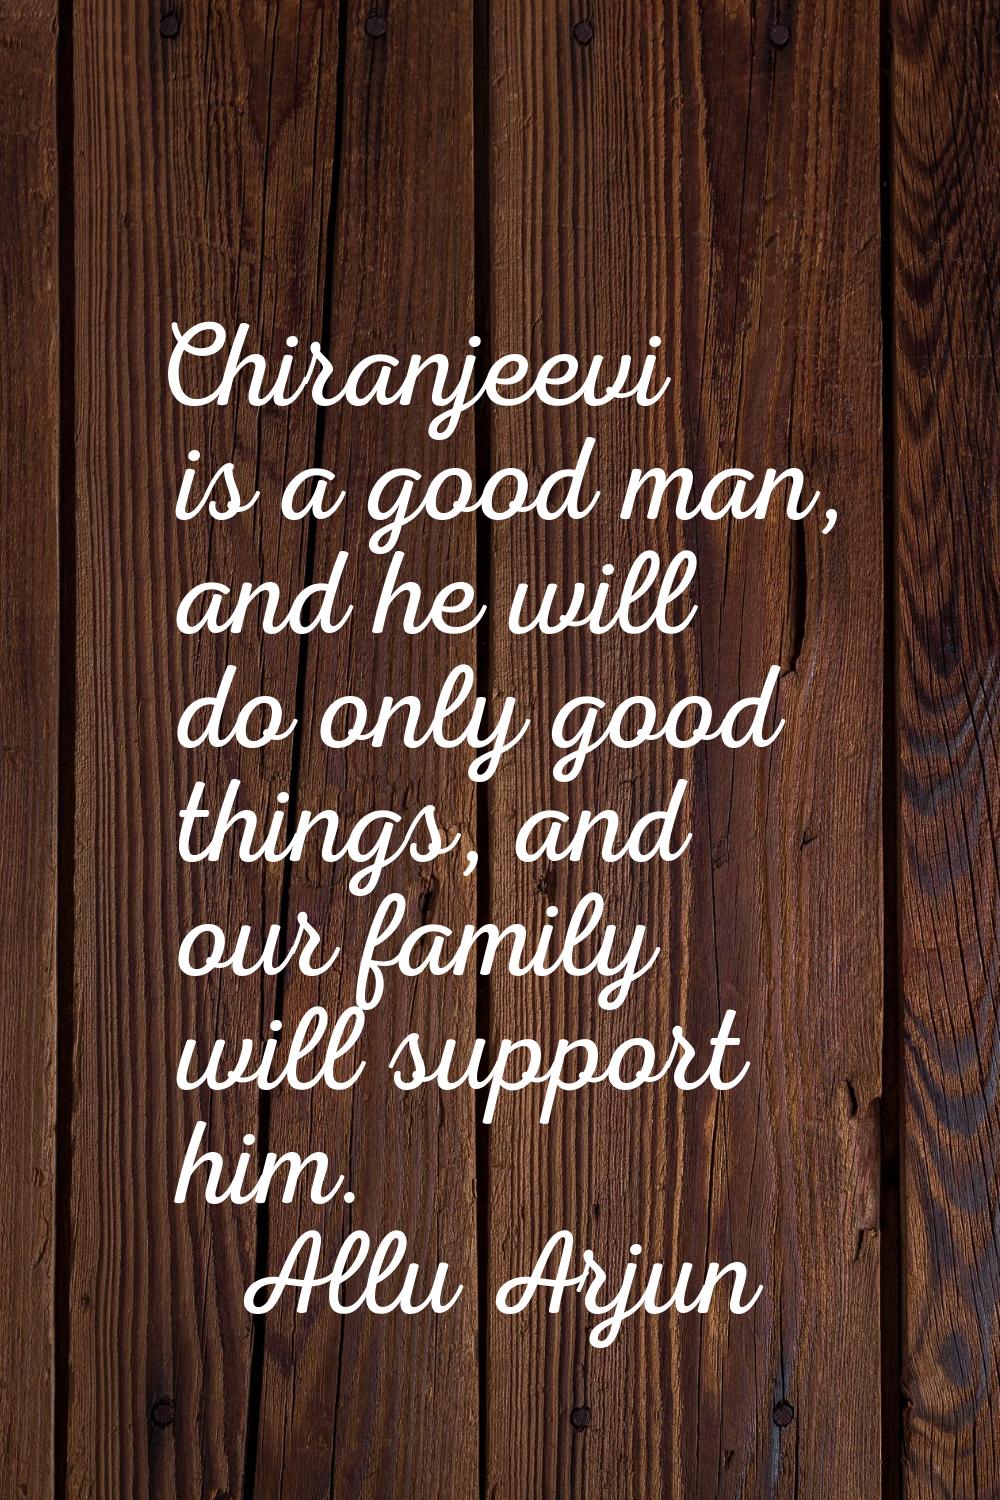 Chiranjeevi is a good man, and he will do only good things, and our family will support him.